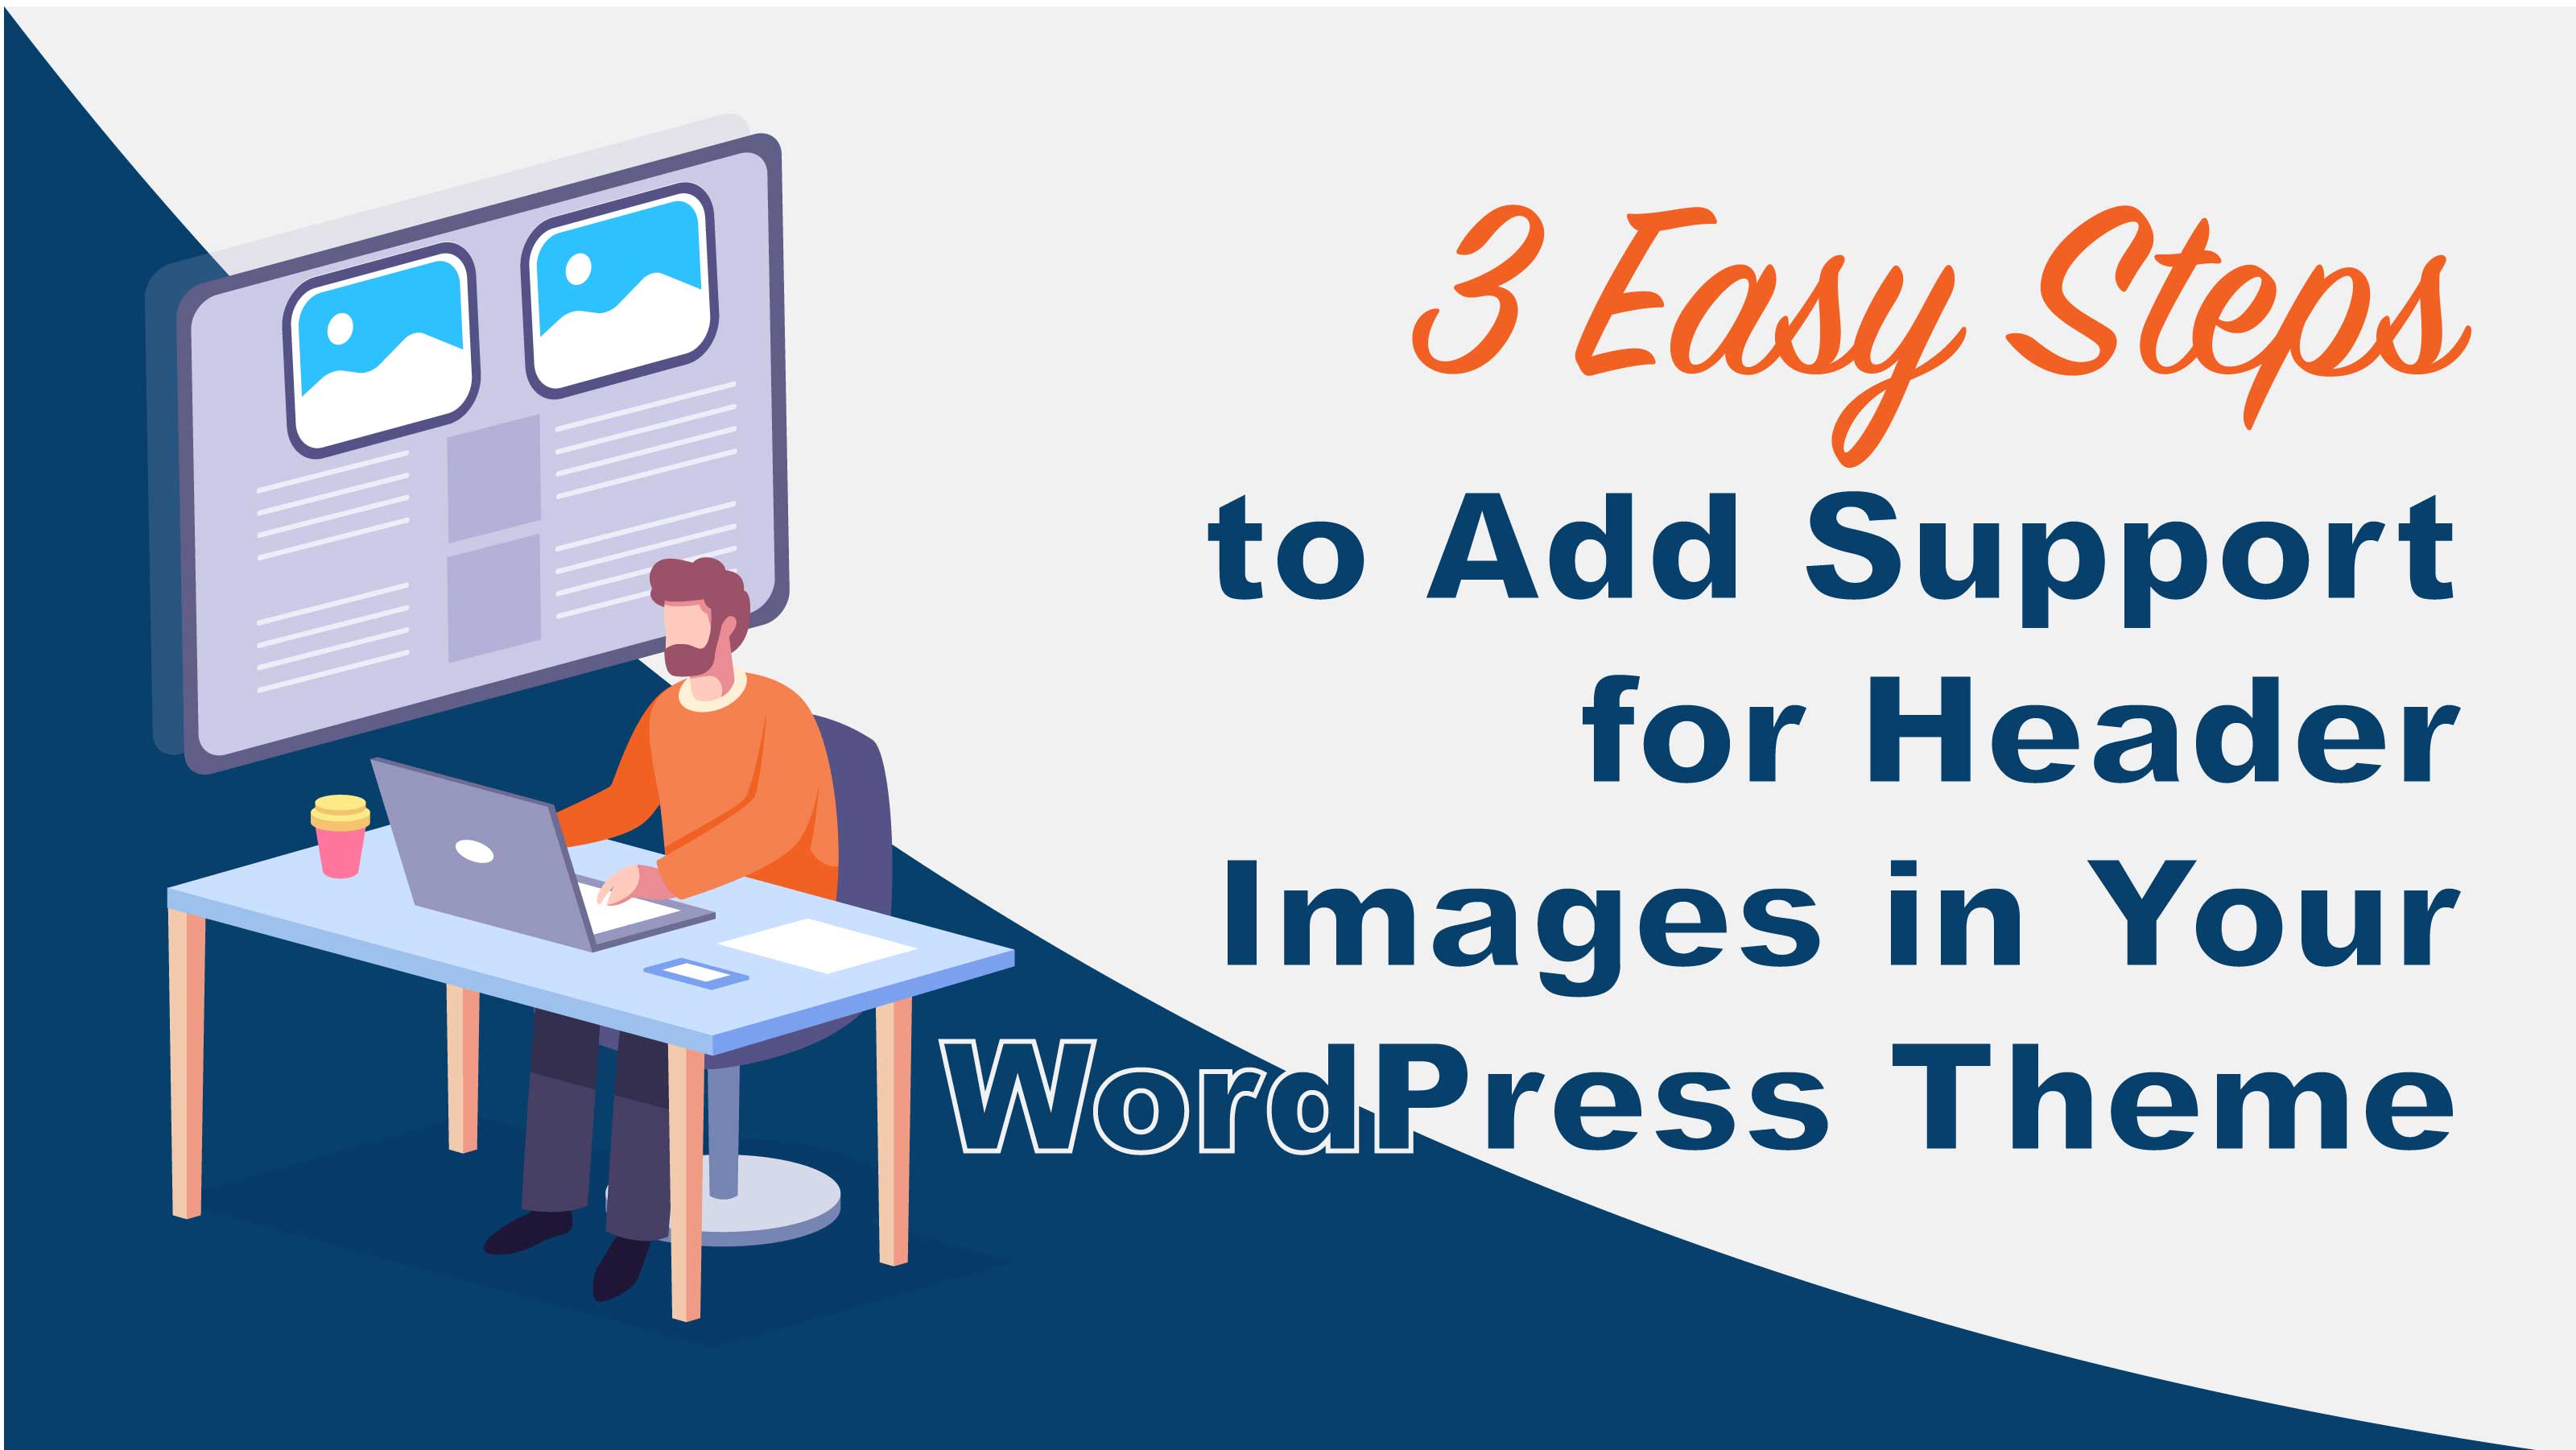 3 Easy Steps to Add Support for Header Images in Your WordPress Theme